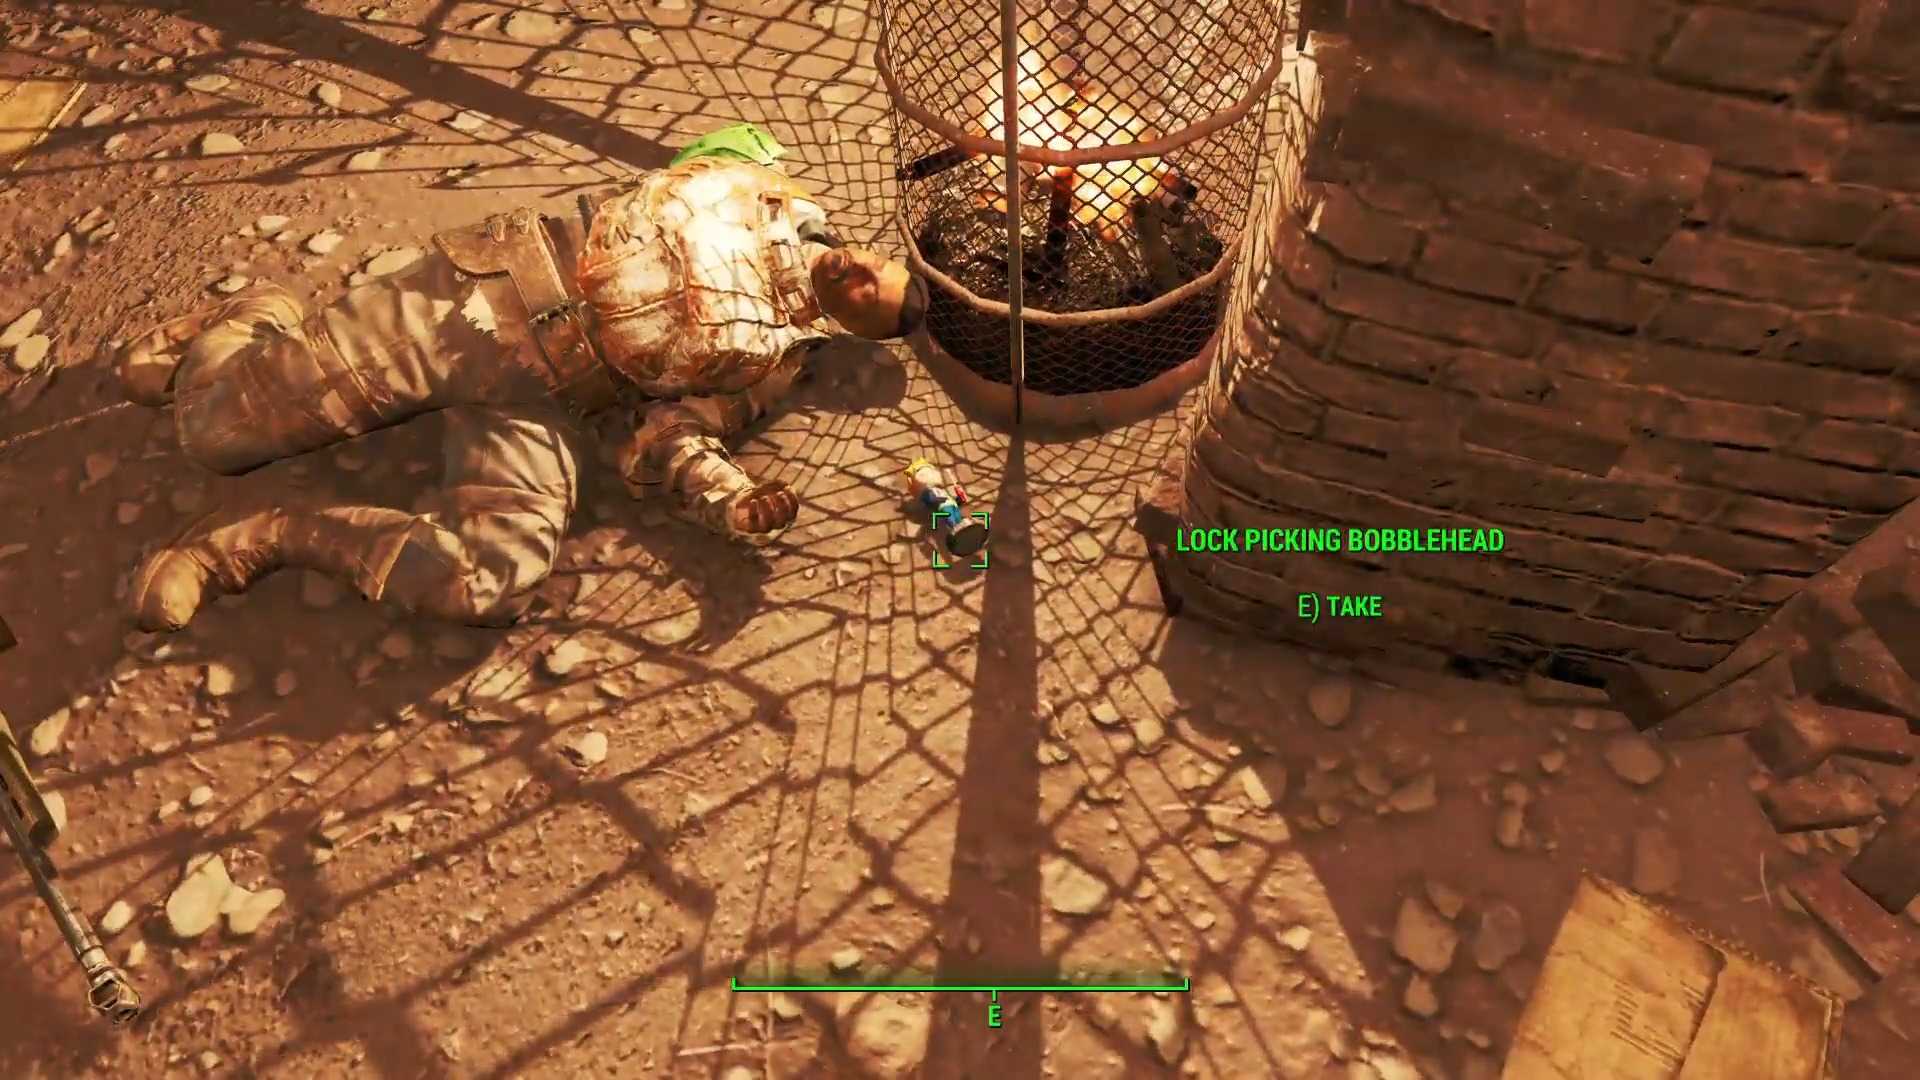 The Lock Picking Bobblehead in Fallout 4